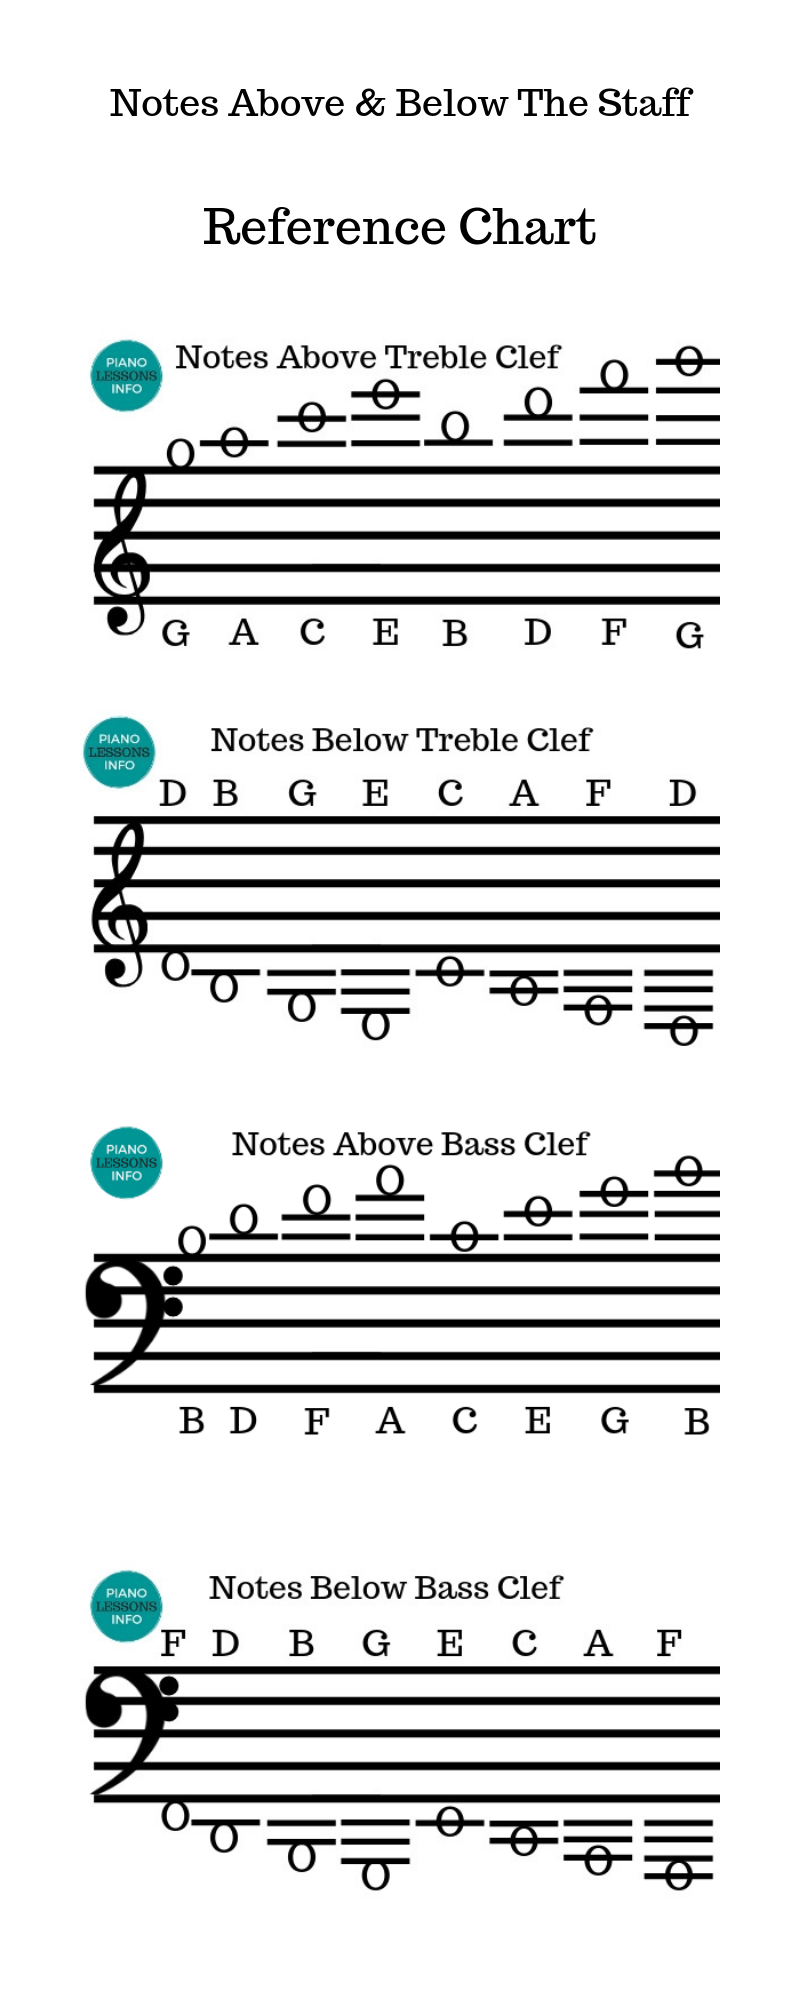 Notes Above & Below the Staff Reference Chart